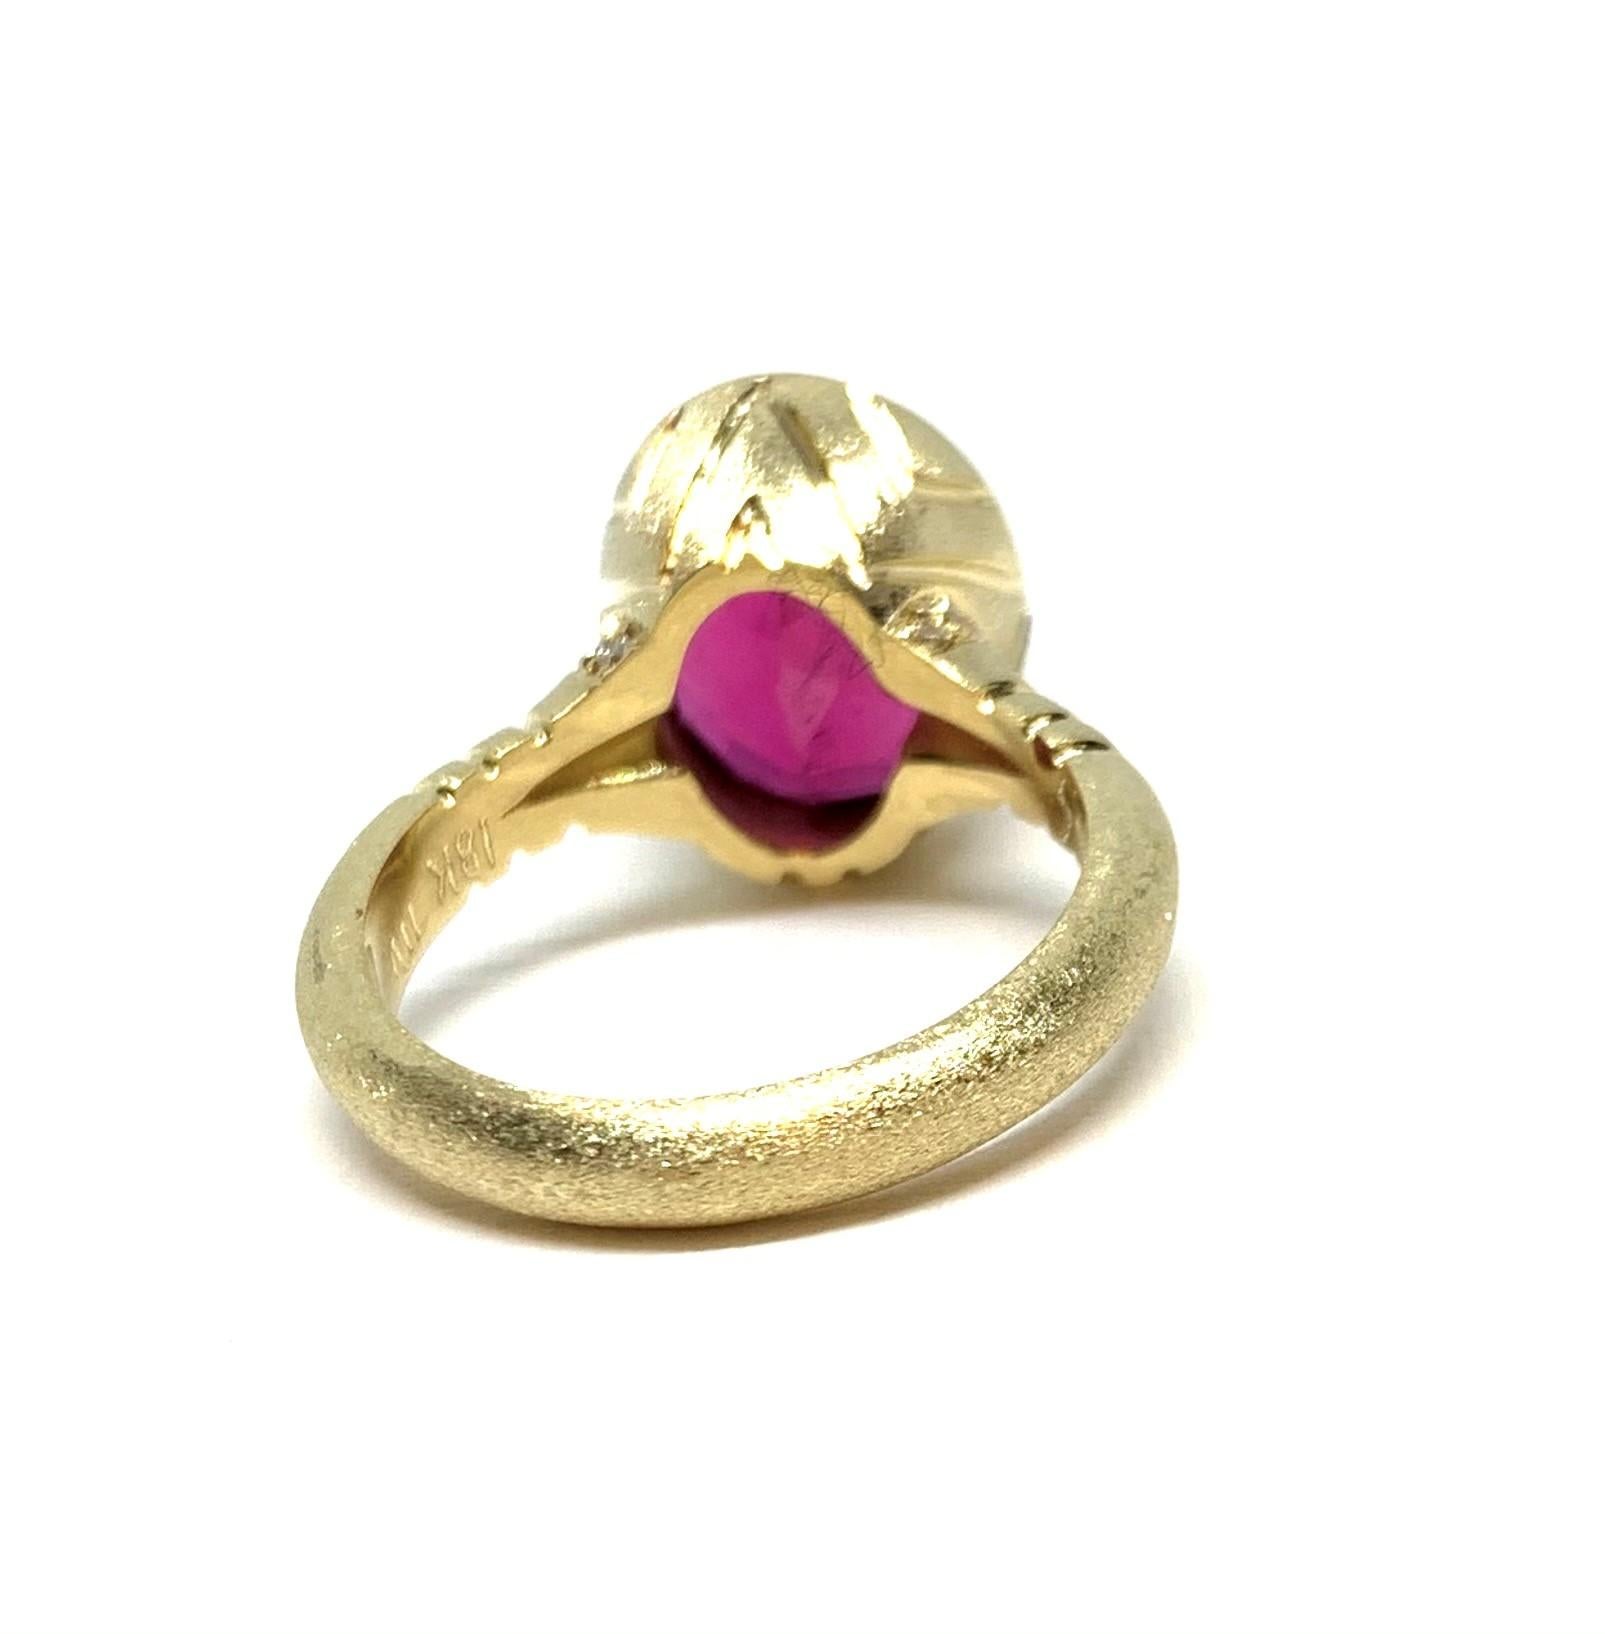 Oval Cut 5.35 Carat Rubellite Tourmaline and Diamond Band Ring in 18k Yellow Gold  For Sale